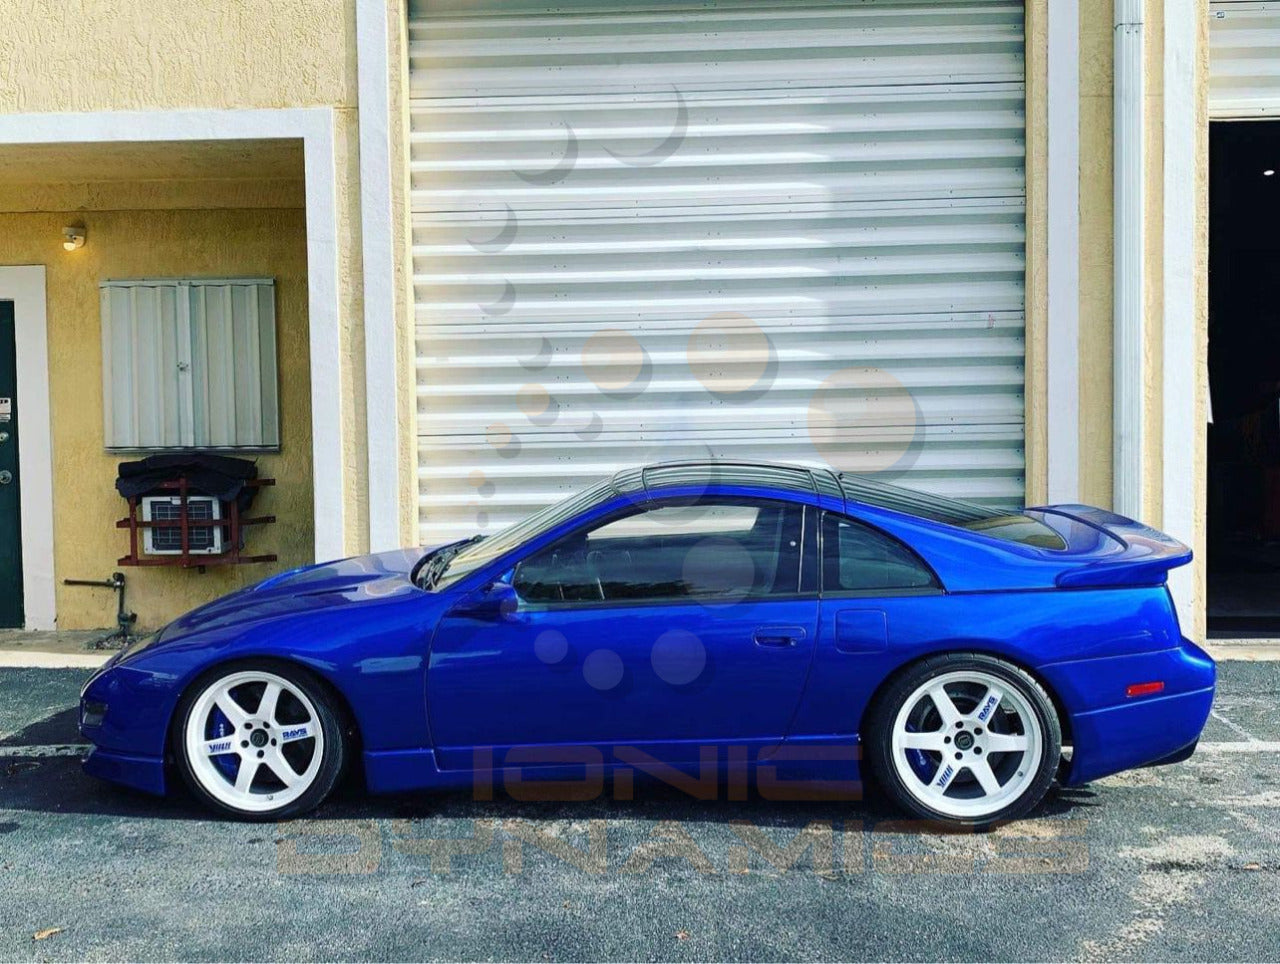 BLACK FRIDAY 300zx M-spec rear spoiler Save $40 and $80 – Ionic 